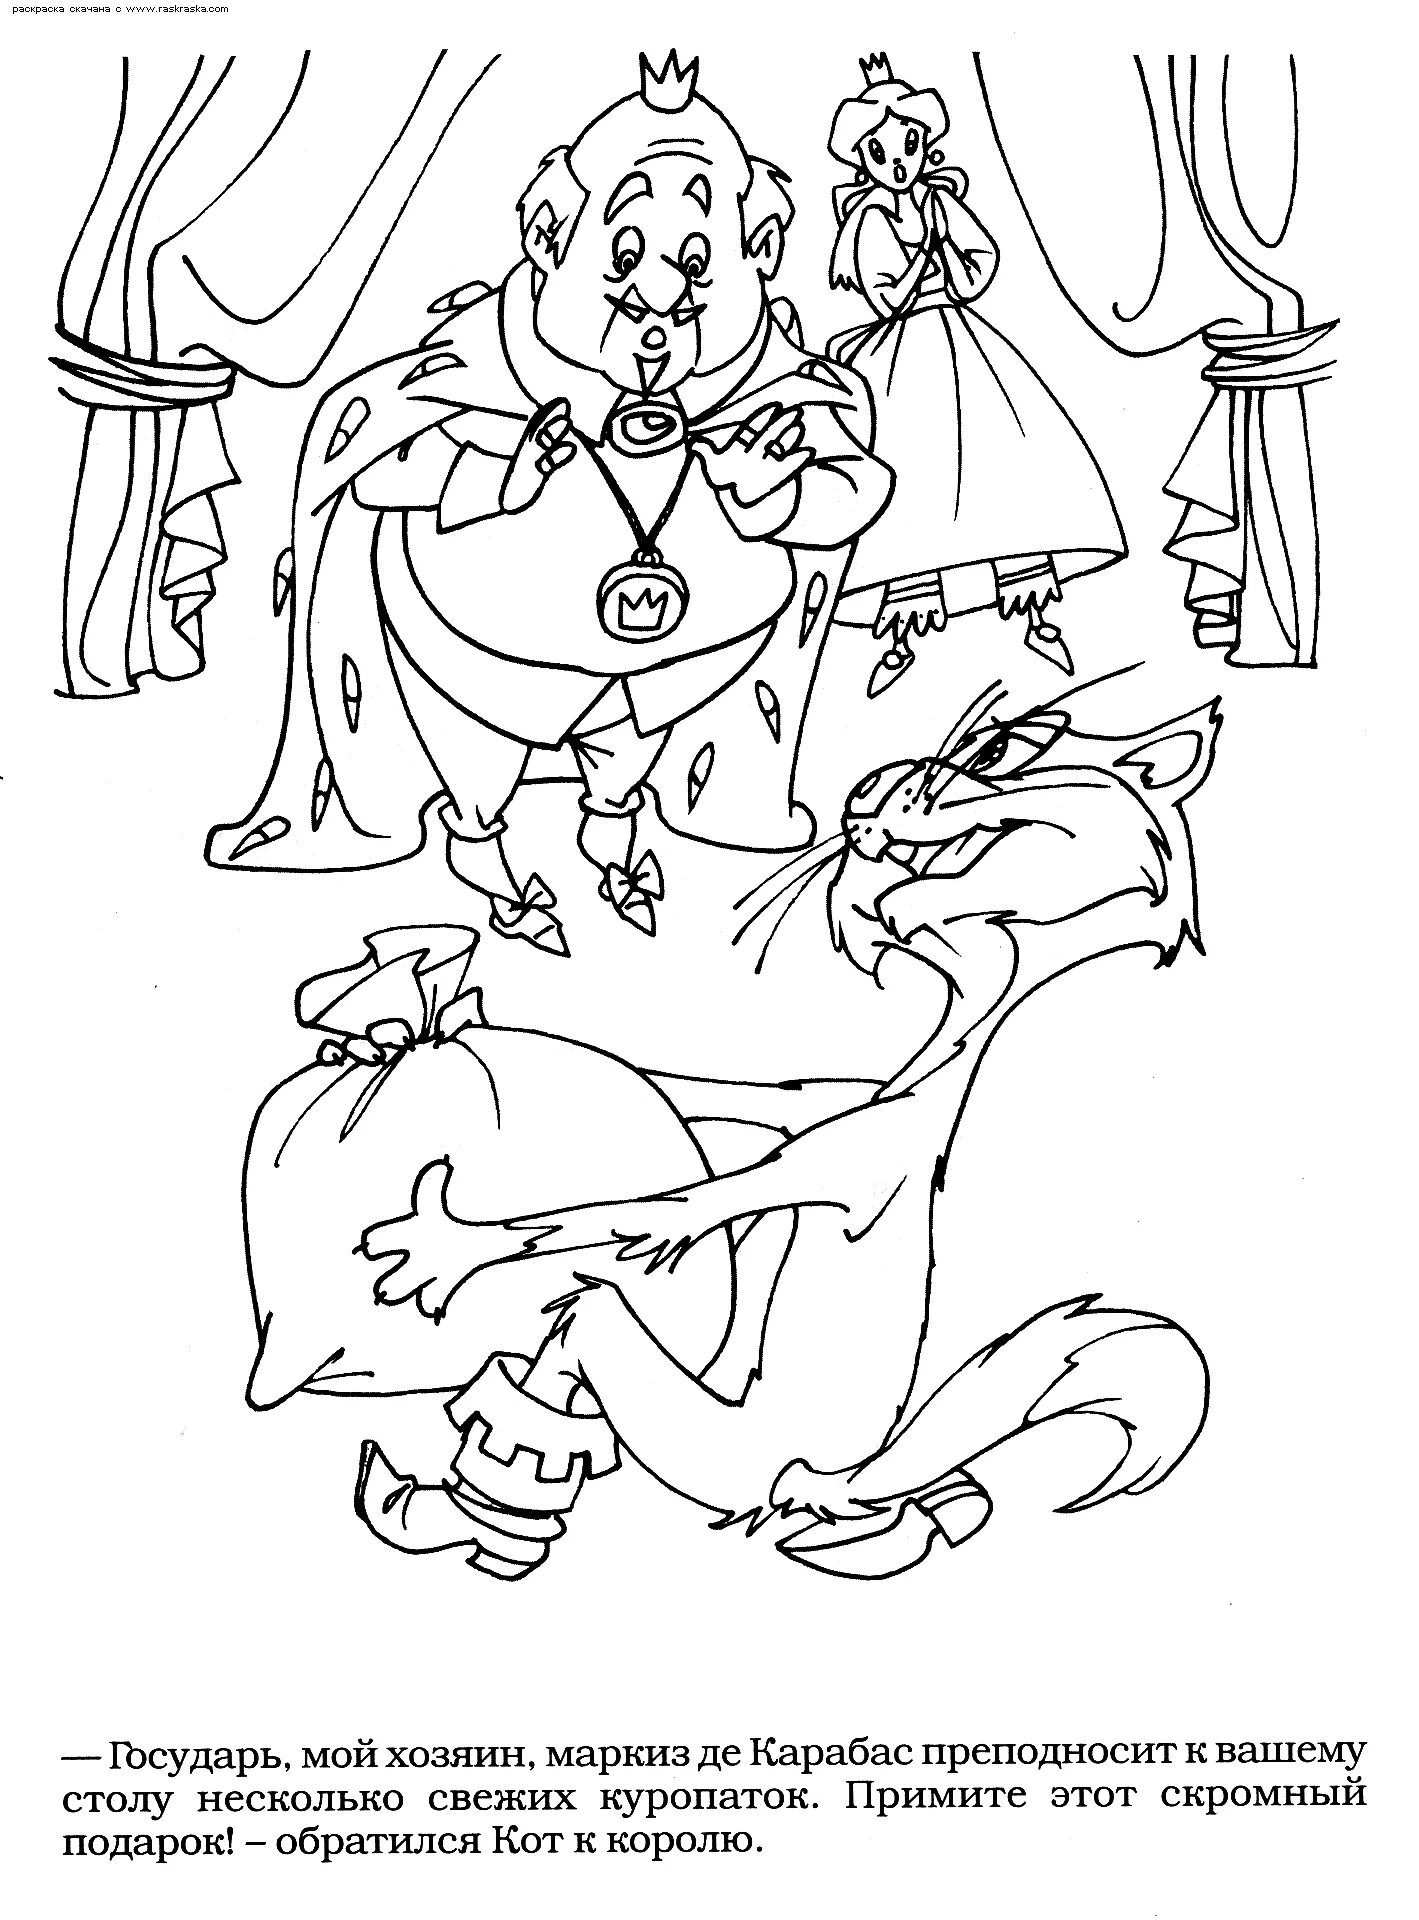 Unforgettable coloring book from Perrault's fairy tales